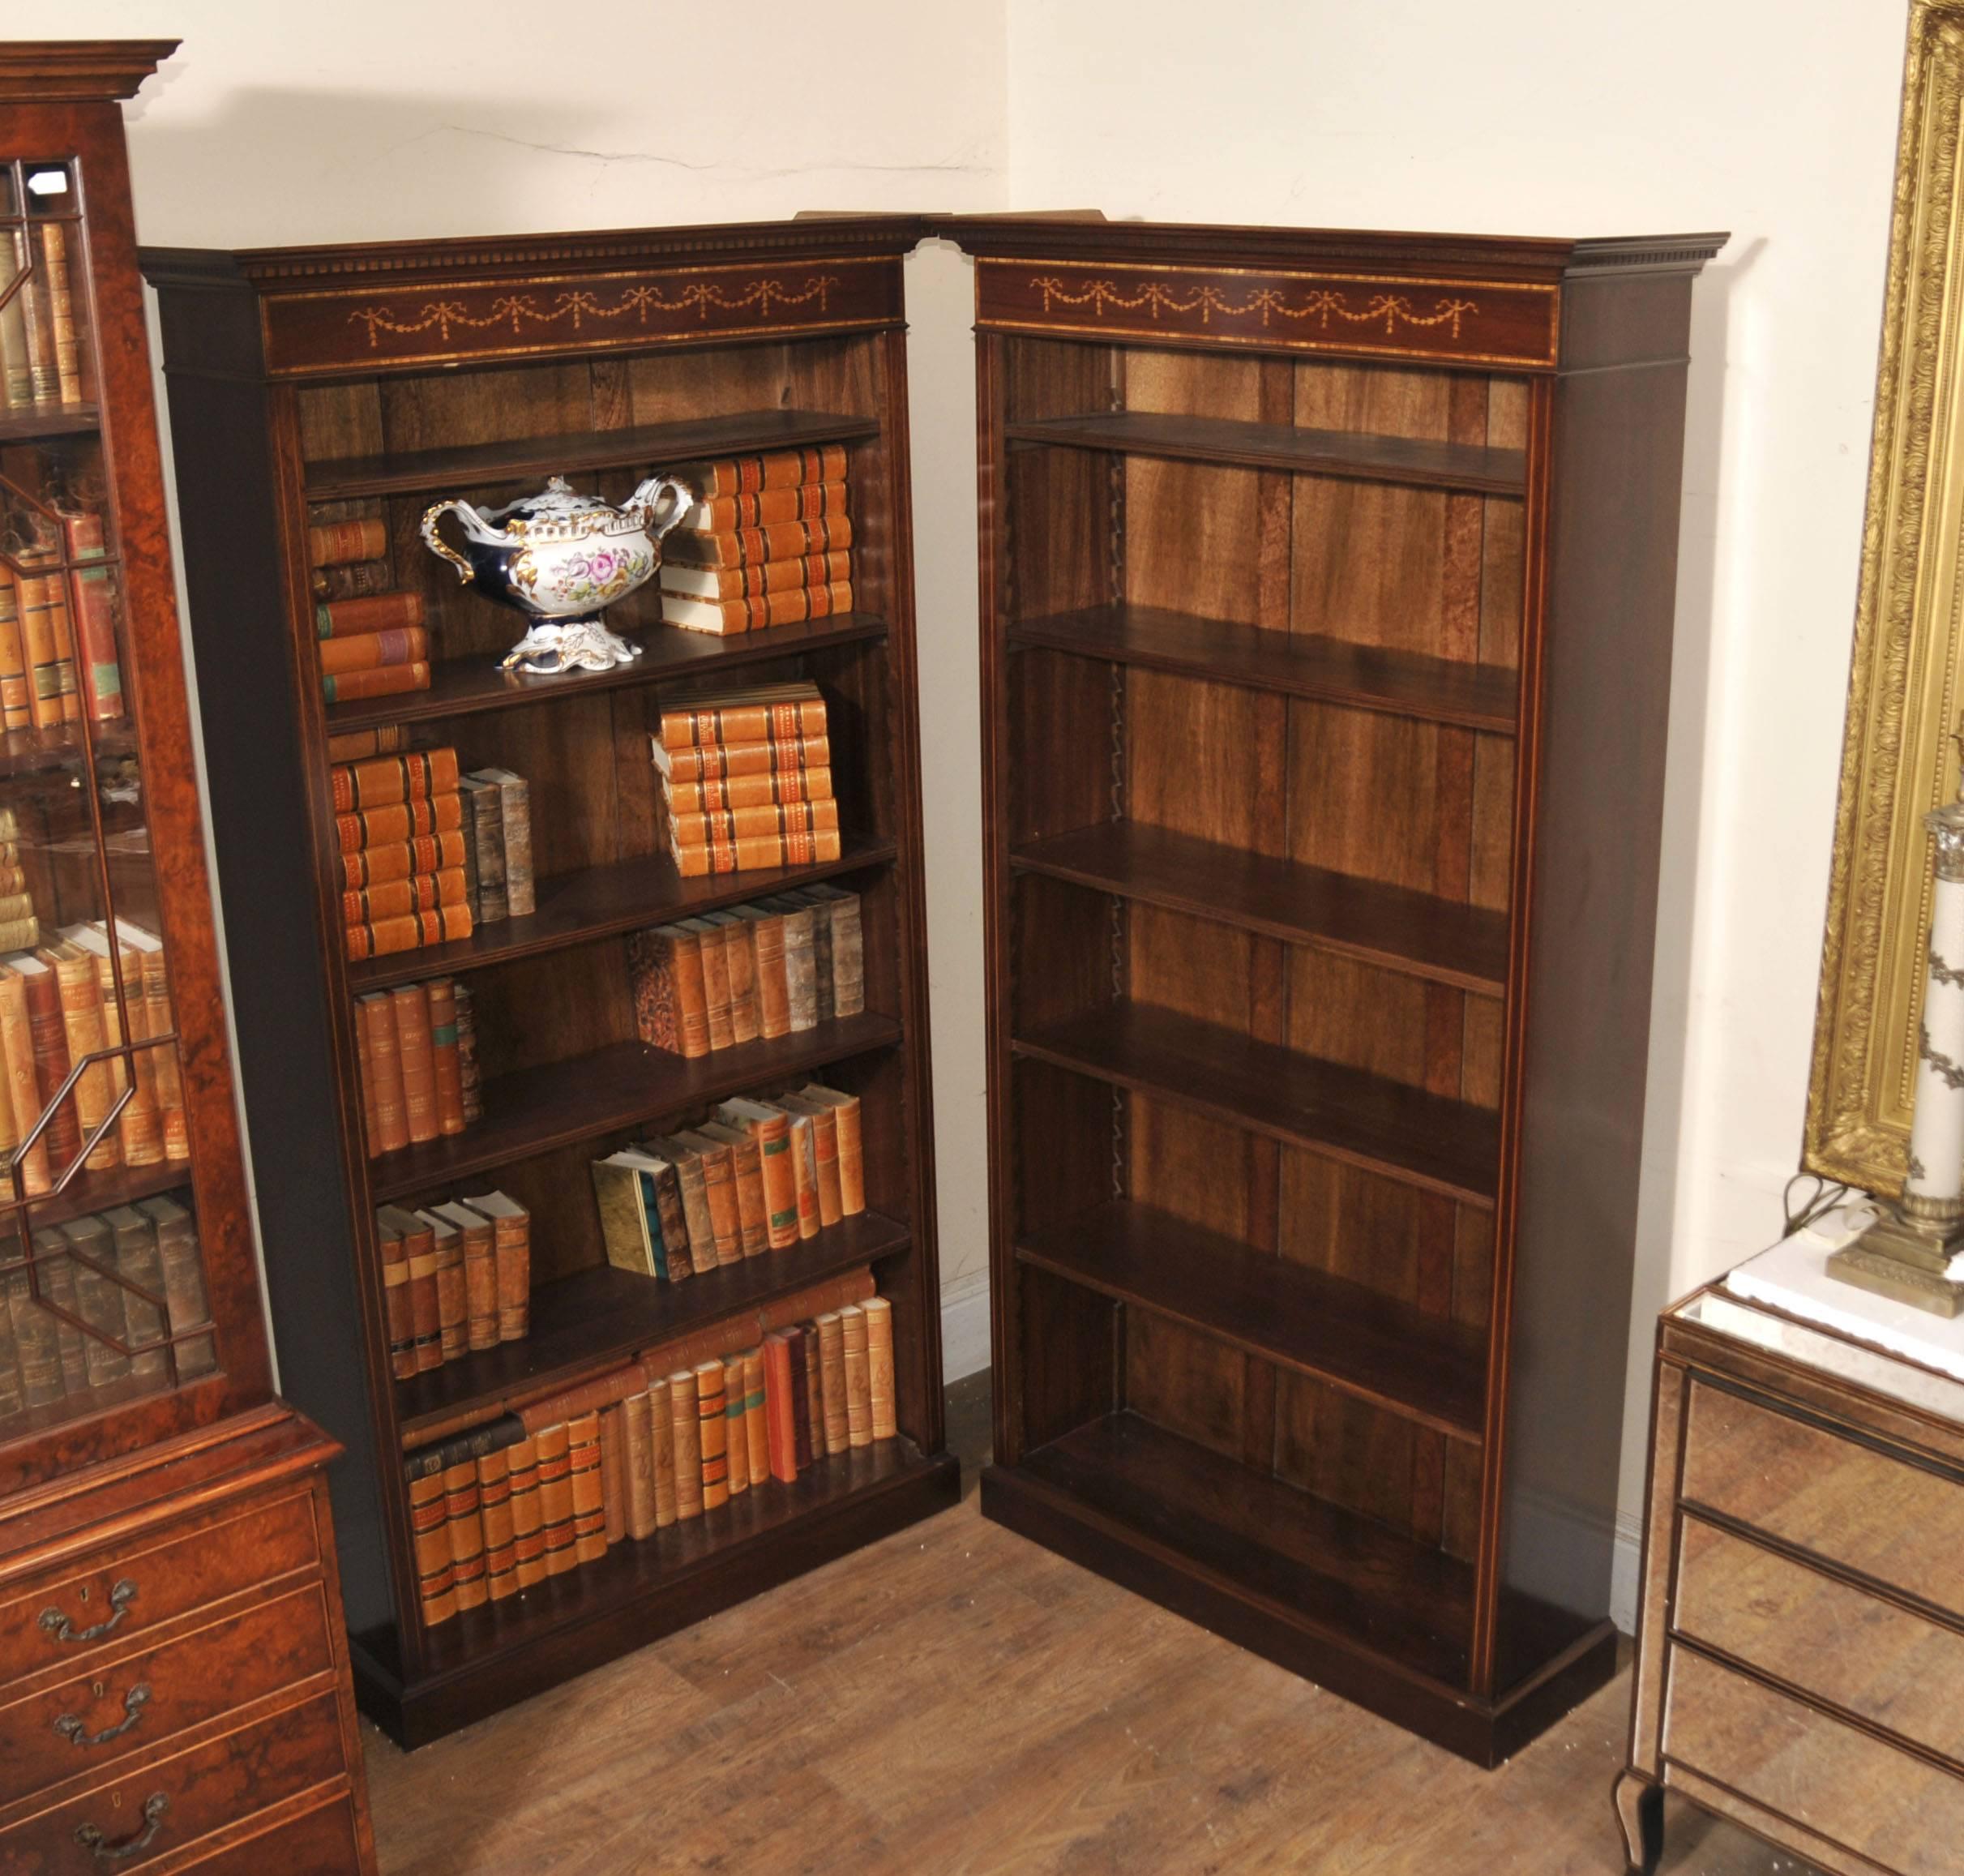 You are looking at a pair of English Sheraton style open front bookcases hand crafted from the finest mahogany. This lovely pair are the perfect mix of decorative beauty and practical functionality to make for a vintage design classic. They look